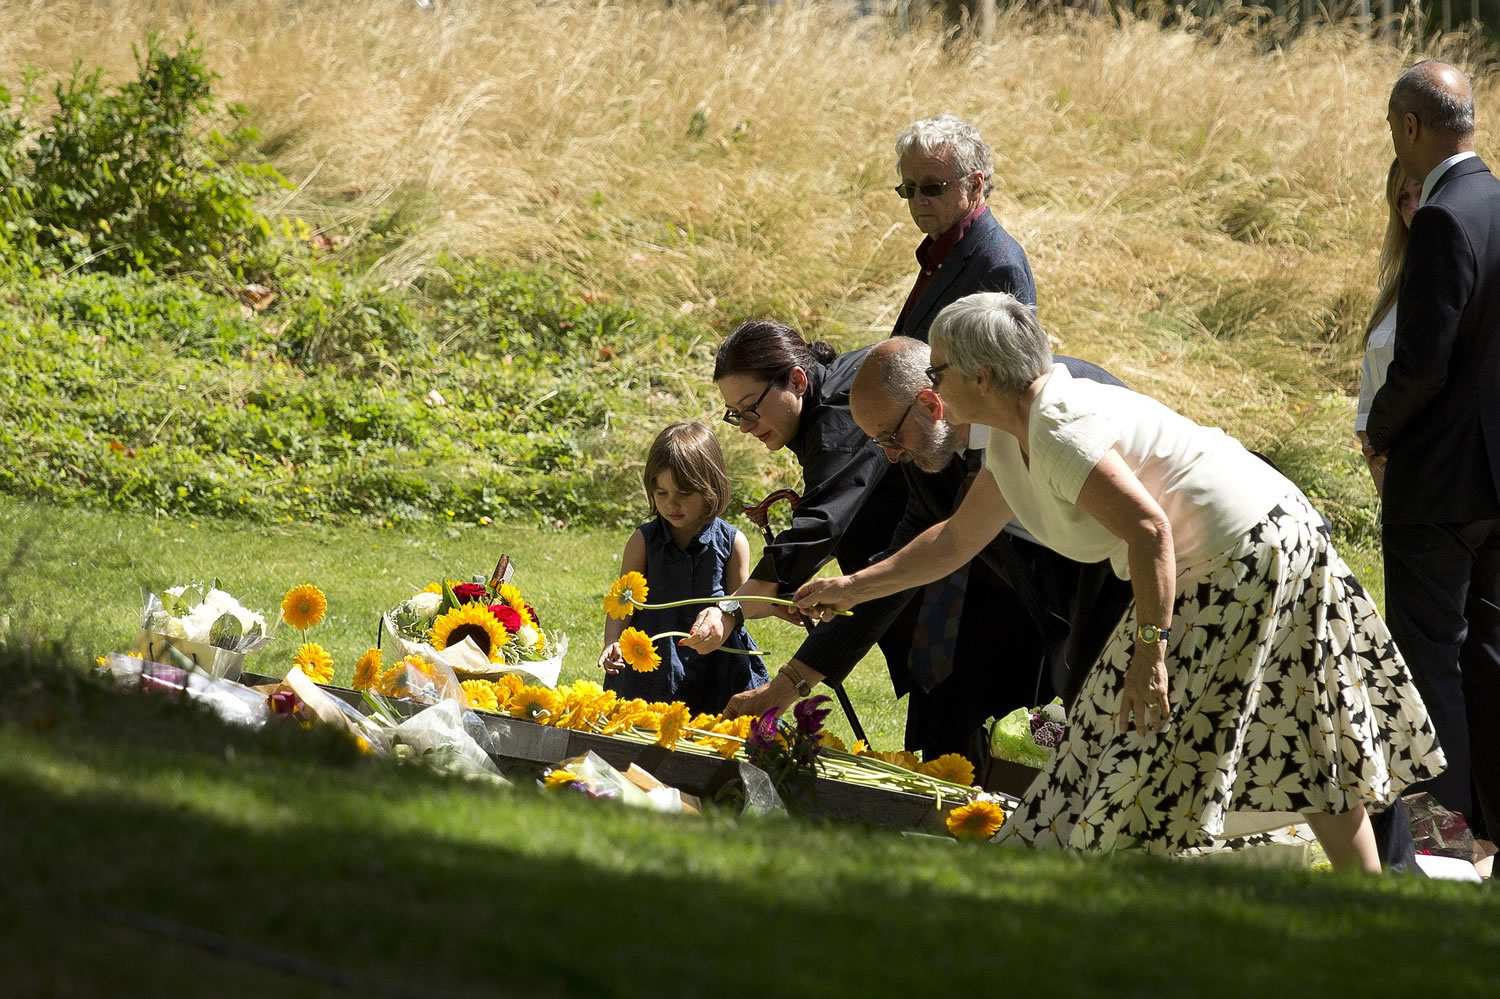 Australia's Gill Hicks, second from left, who lost both her legs in the July 7, 2005, terrorist attacks on London's transit system, lays a flower flanked by her daughter Amelie, left, during a service Tuesday for survivors and relatives of the victims to mark the 10-year anniversary of the 7/7 London attacks, at the 7/7 memorial in Hyde Park, London. Britons paused in silence and walked in solidarity to mark the anniversary. Four British men inspired by al-Qaida blew themselves up on three London subway trains and a bus during the morning rush hour on July 7, 2005, killing 52 commuters and injuring more than 700.